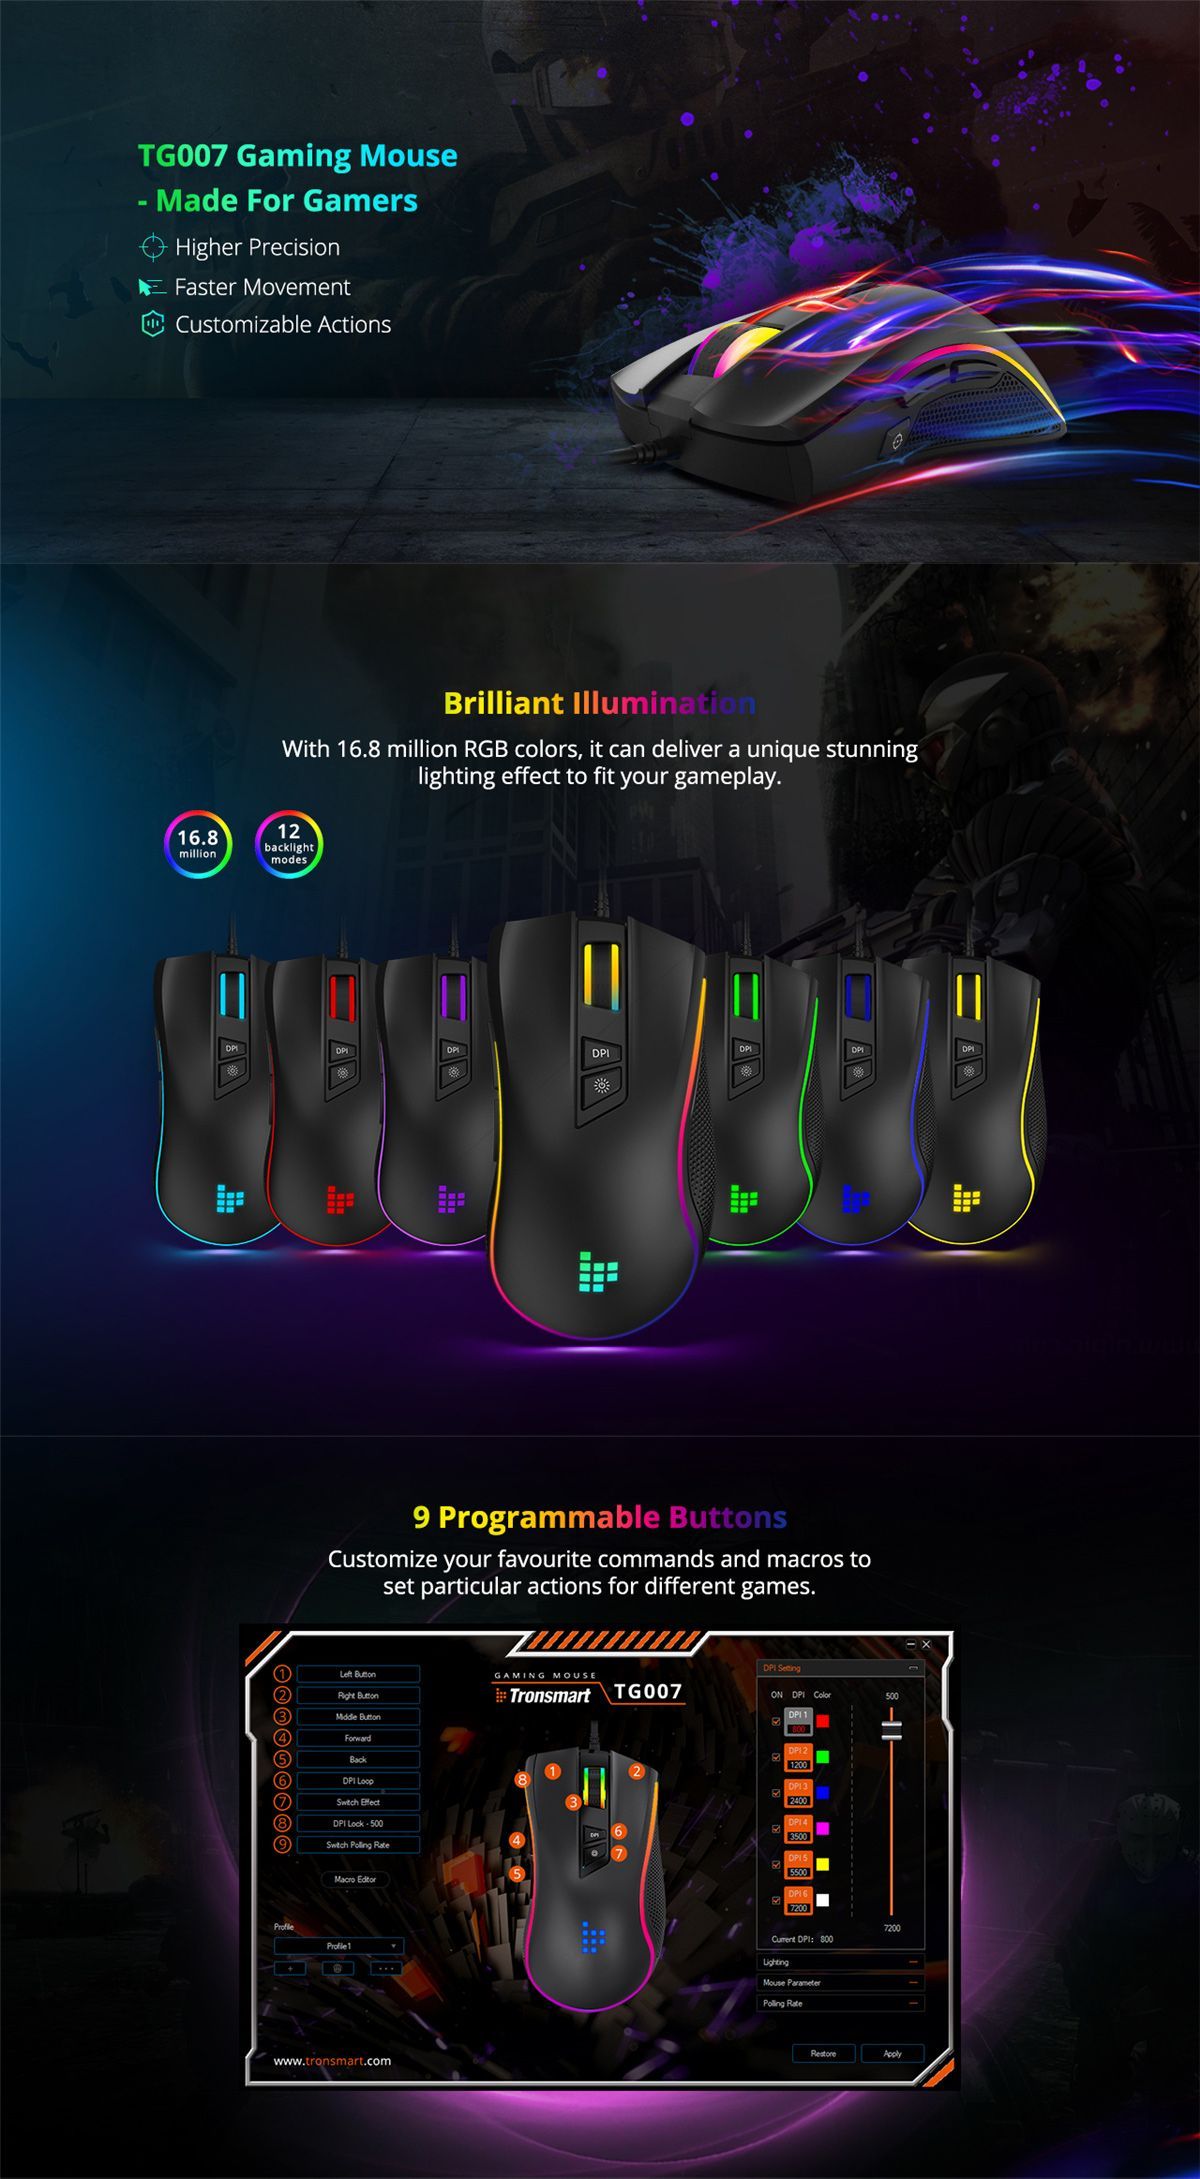 Tronsmart-TG007-Wired-RGB-Gaming-Mouse-USB-Wired-7200DPI-9-Programmable-Buttons-Mouse-for-Computer-P-1666526